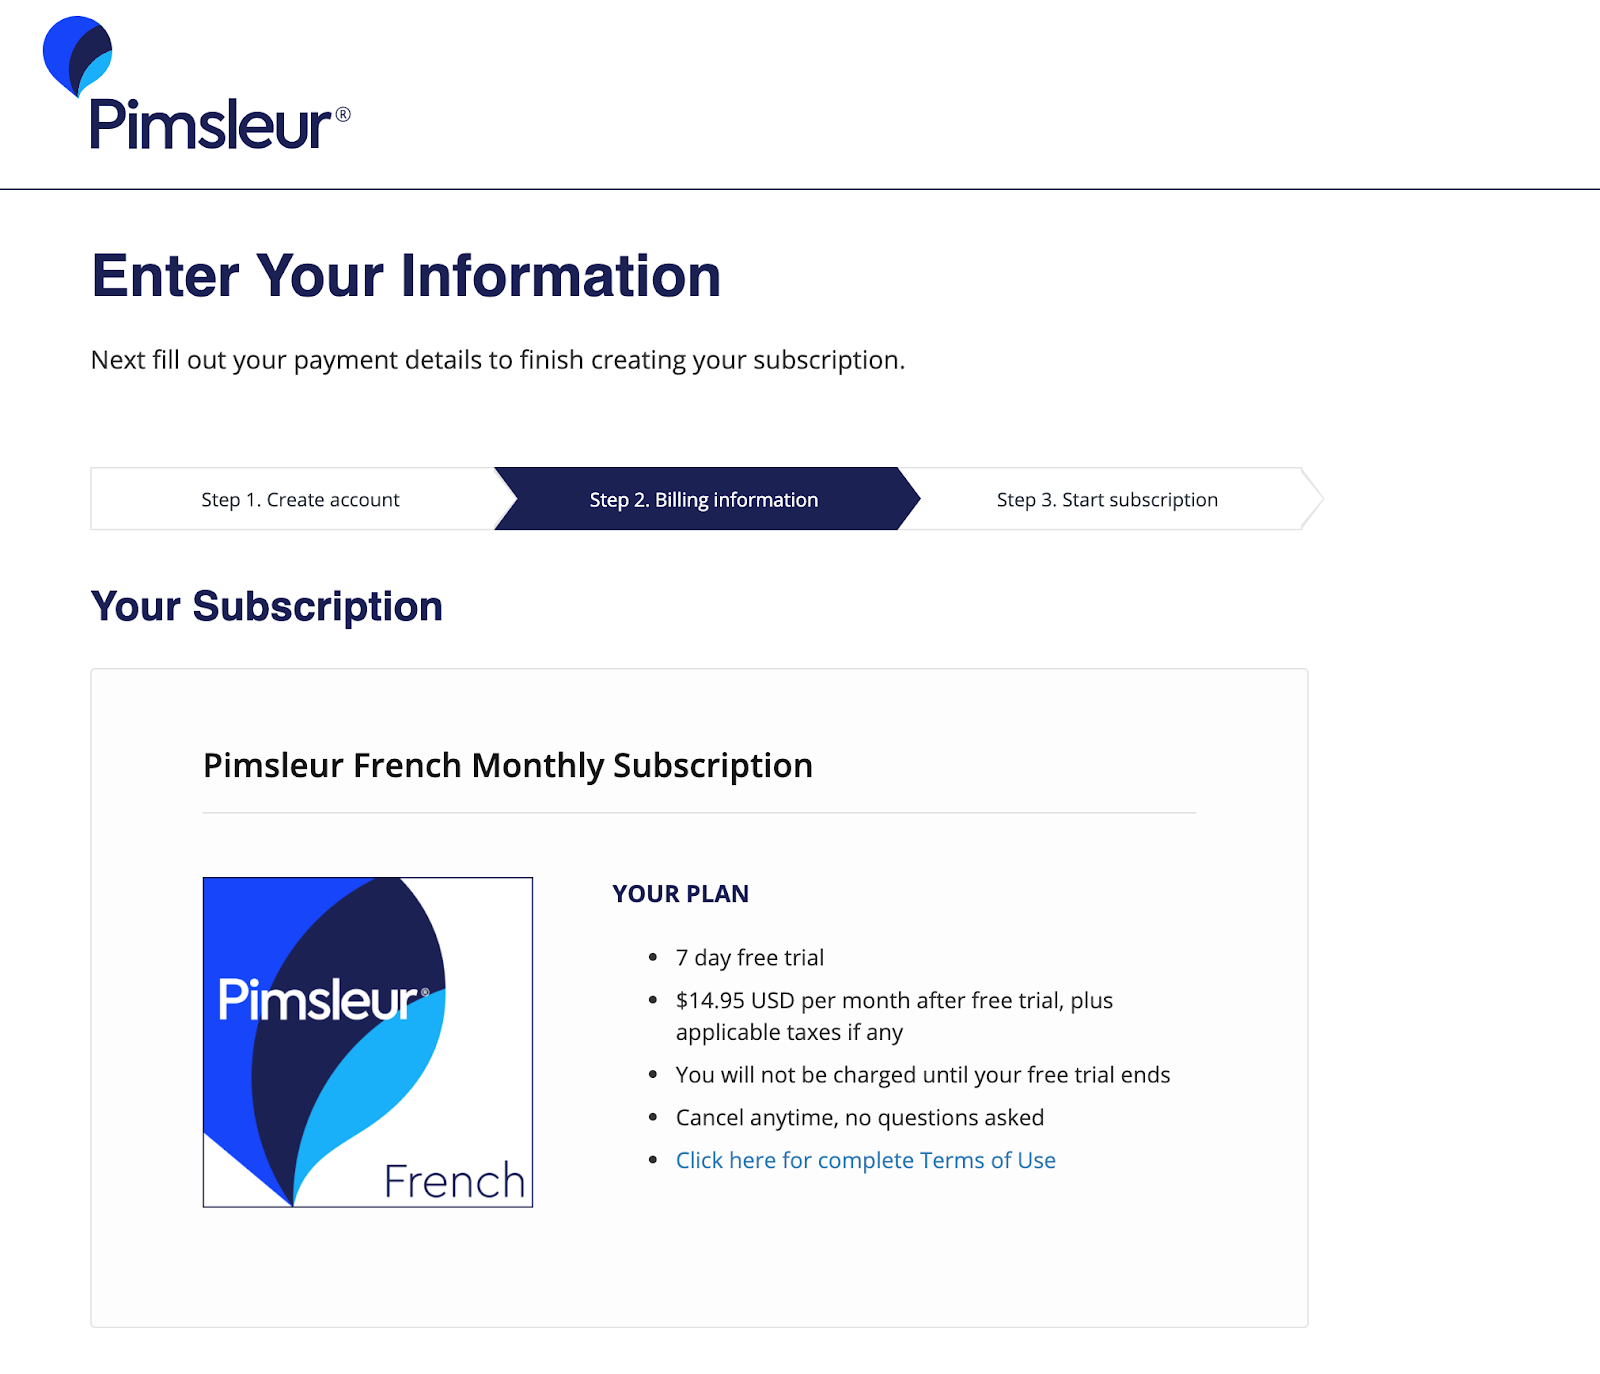 Select your Pimsleur payment option.